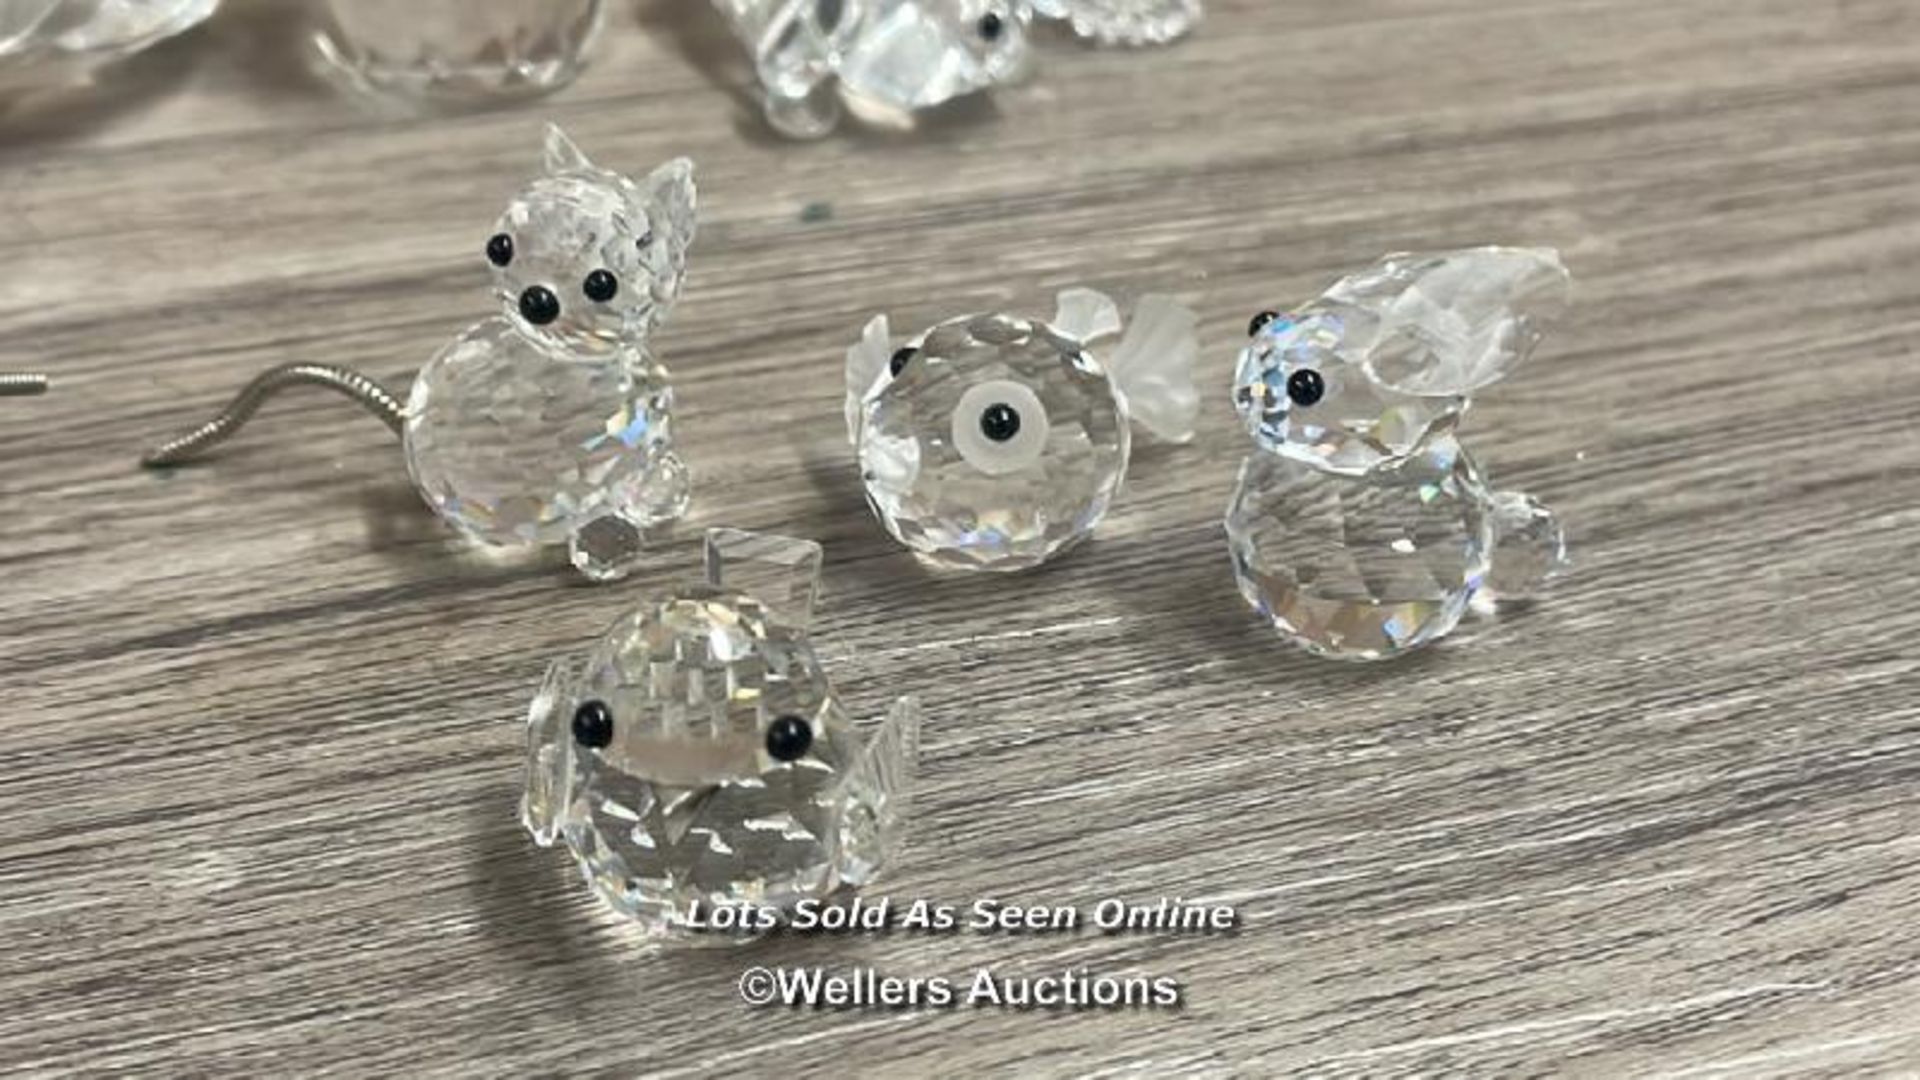 NINE CHRISTAL ANIMALS MARKED SWAROVSKY WITH SIX MORE UNMARKED AND SMALL CHRYSTAL BALL (16) - Image 3 of 6